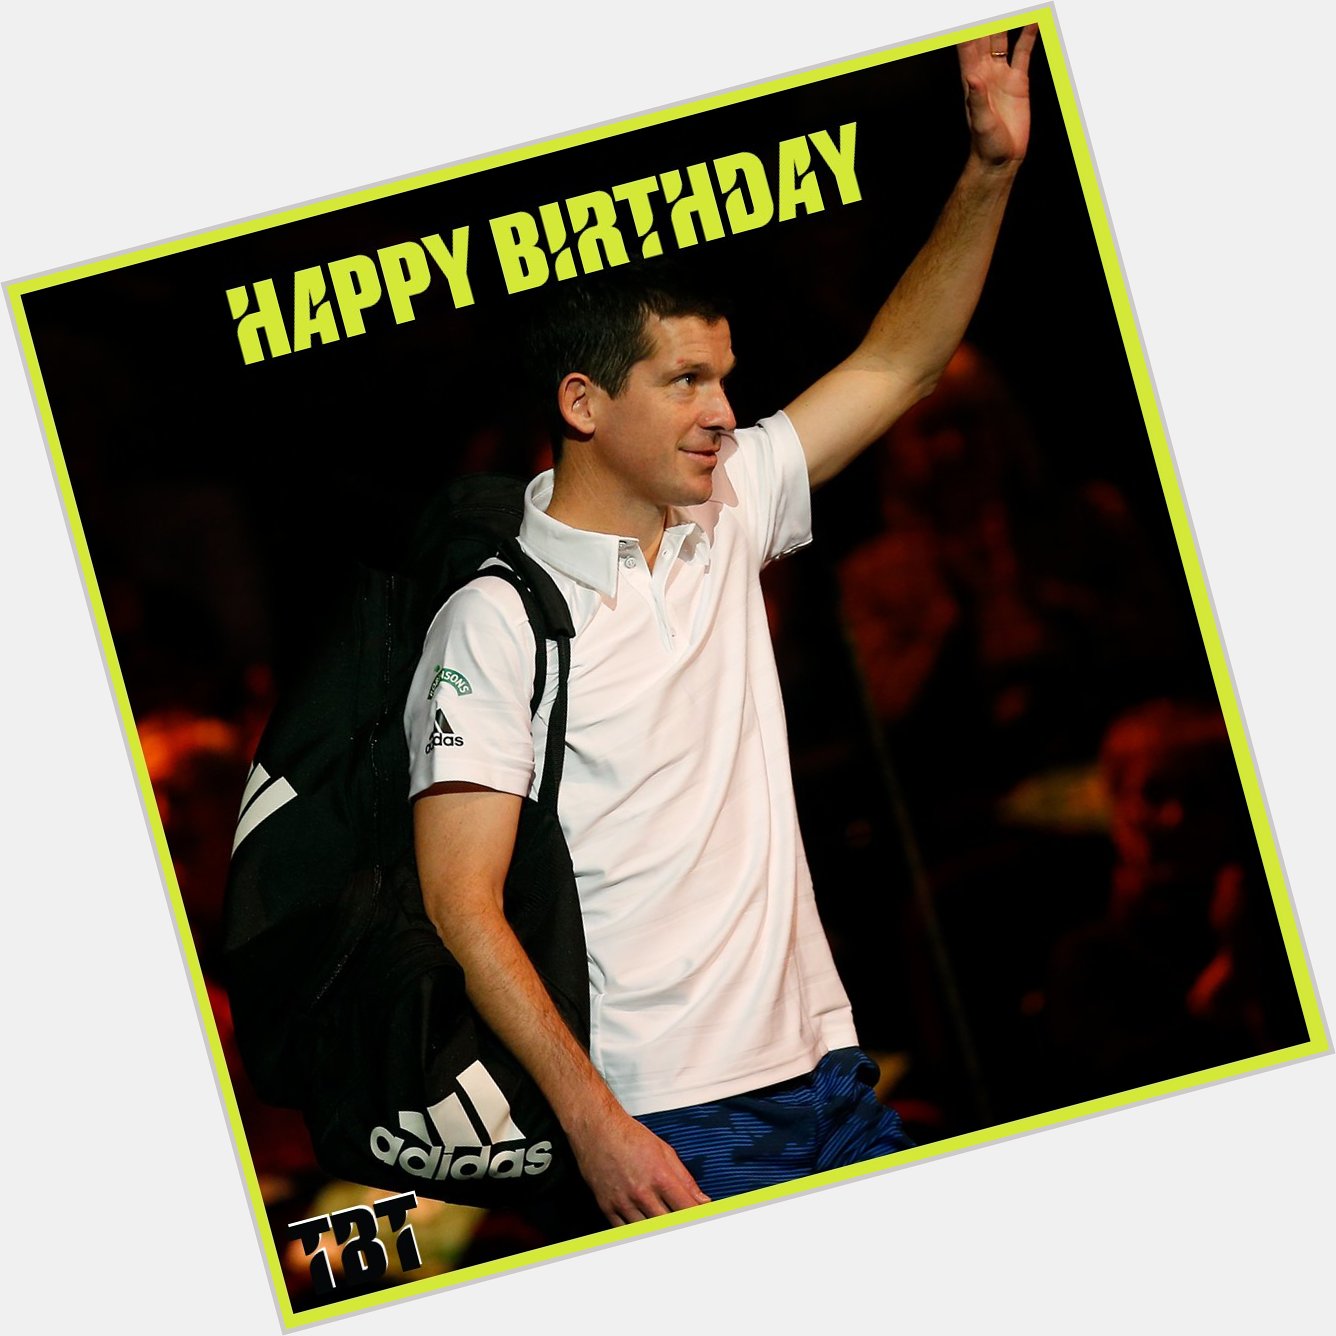 Happy birthday to a man who was our British number one for SEVEN years, Tim Henman! 